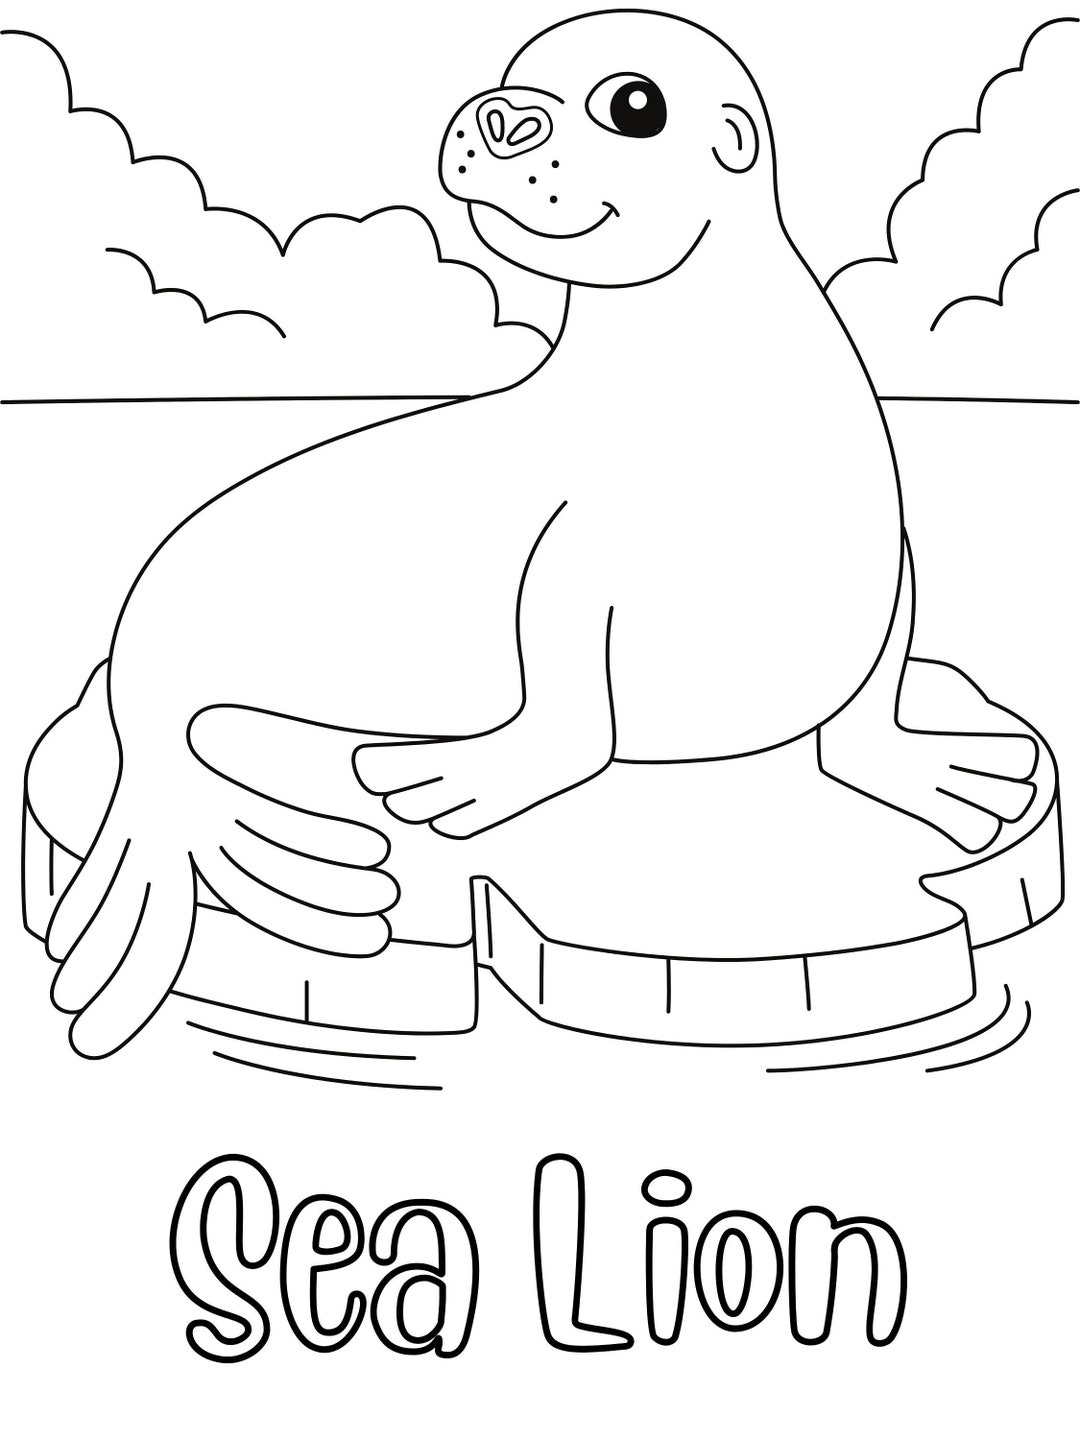 Sea lion coloring page digital download coloring page for kids printable